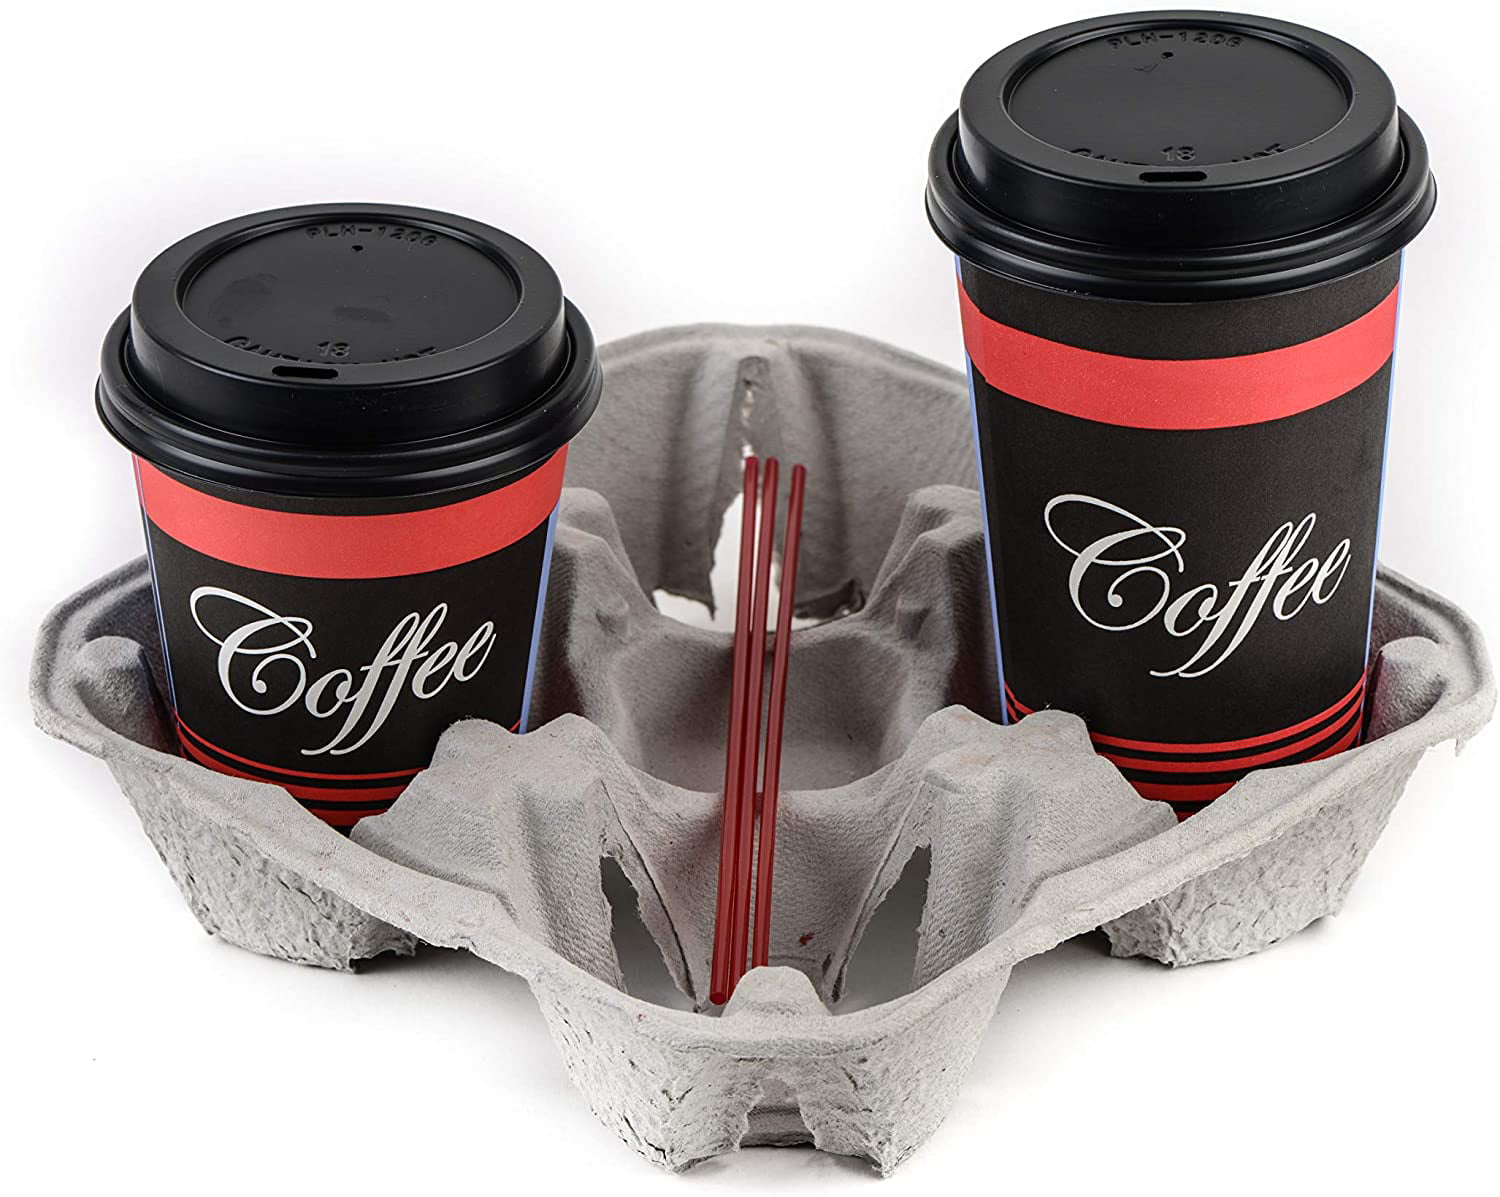 Pulp Fiber Cup Tray Biodegradable 4 Cup Carrier 75 Pack by EcoQuality -  Compostable, Recyclable - for Hot and Cold Drinks. Eco-Friendly and  Stackable to Keep Coffee, Tea, Soda, Boba from Spilling 